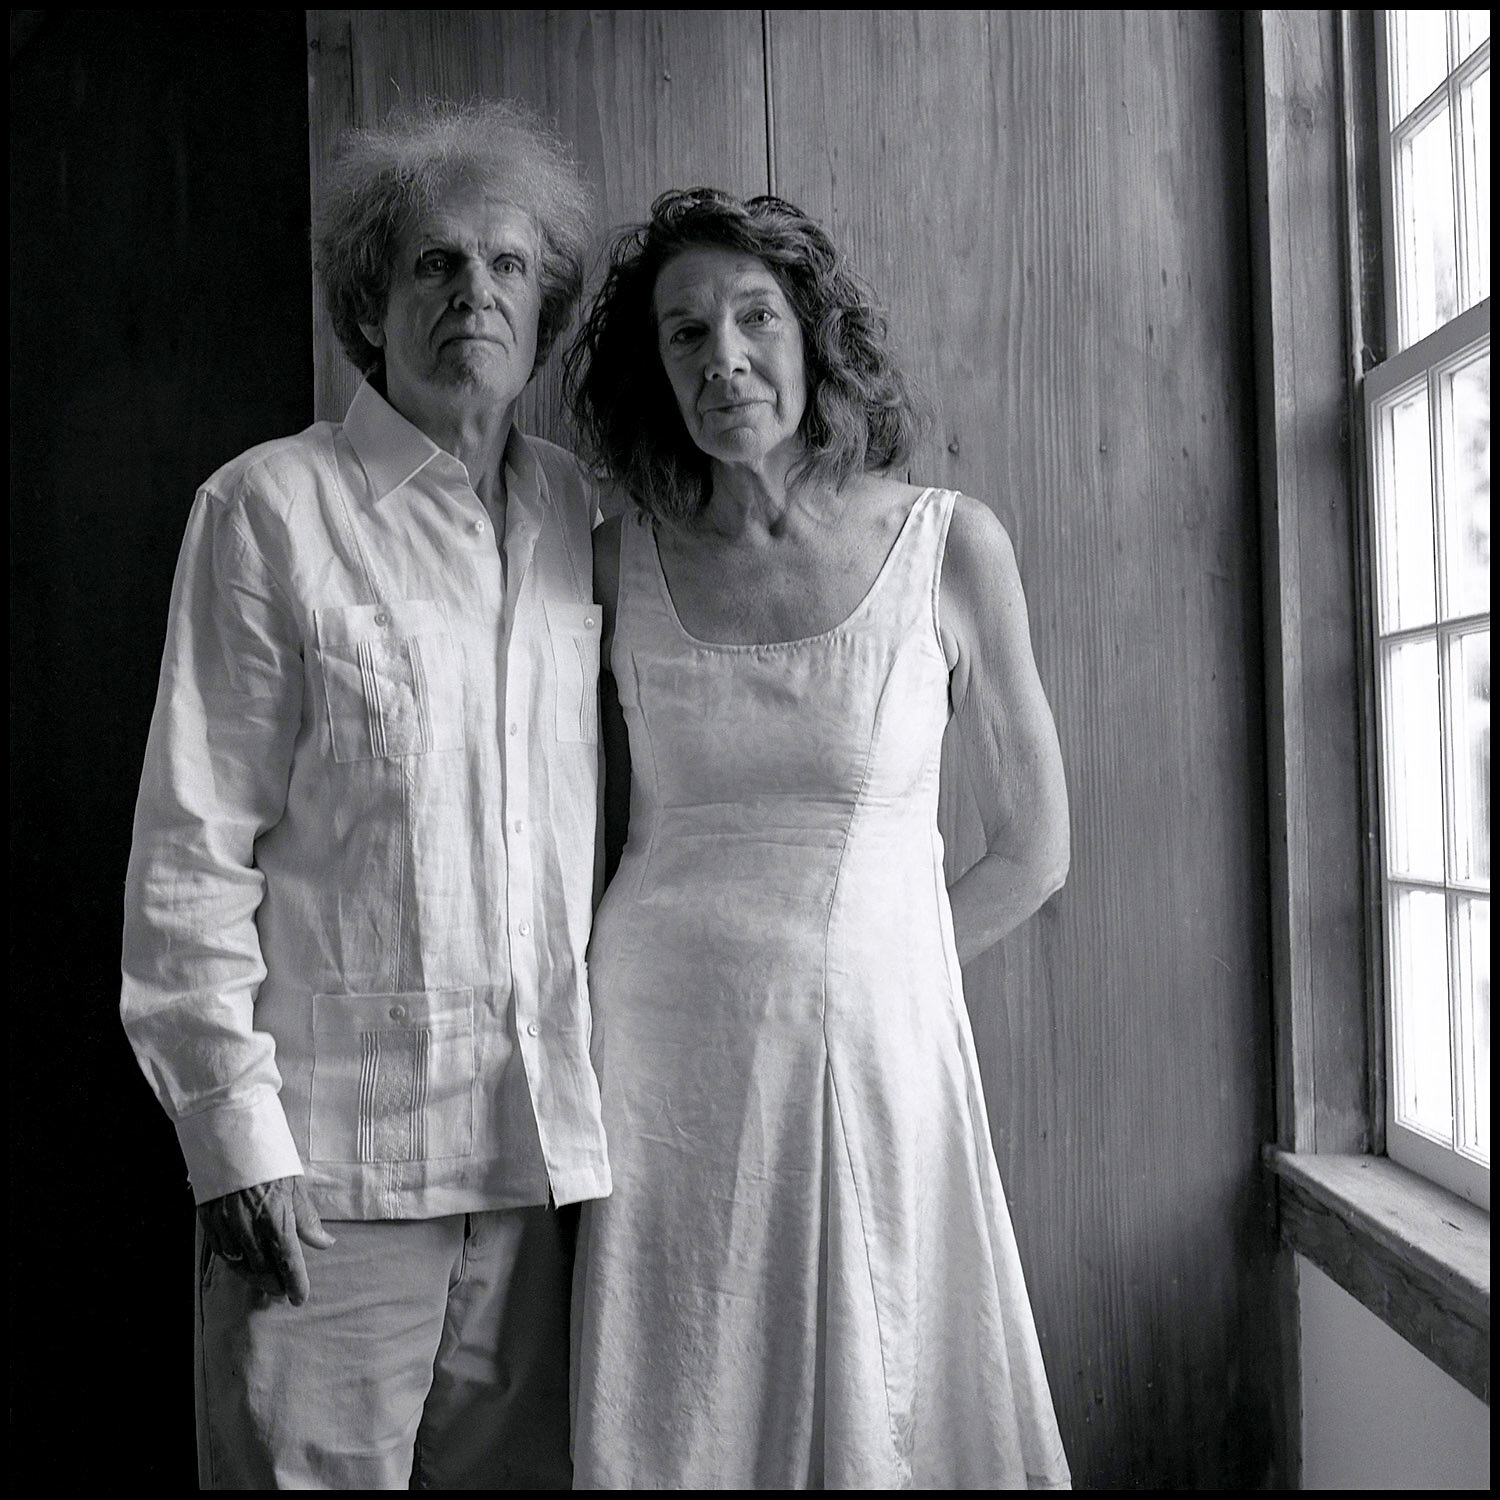  Poets Mary Ruefle and Michael Burkard 